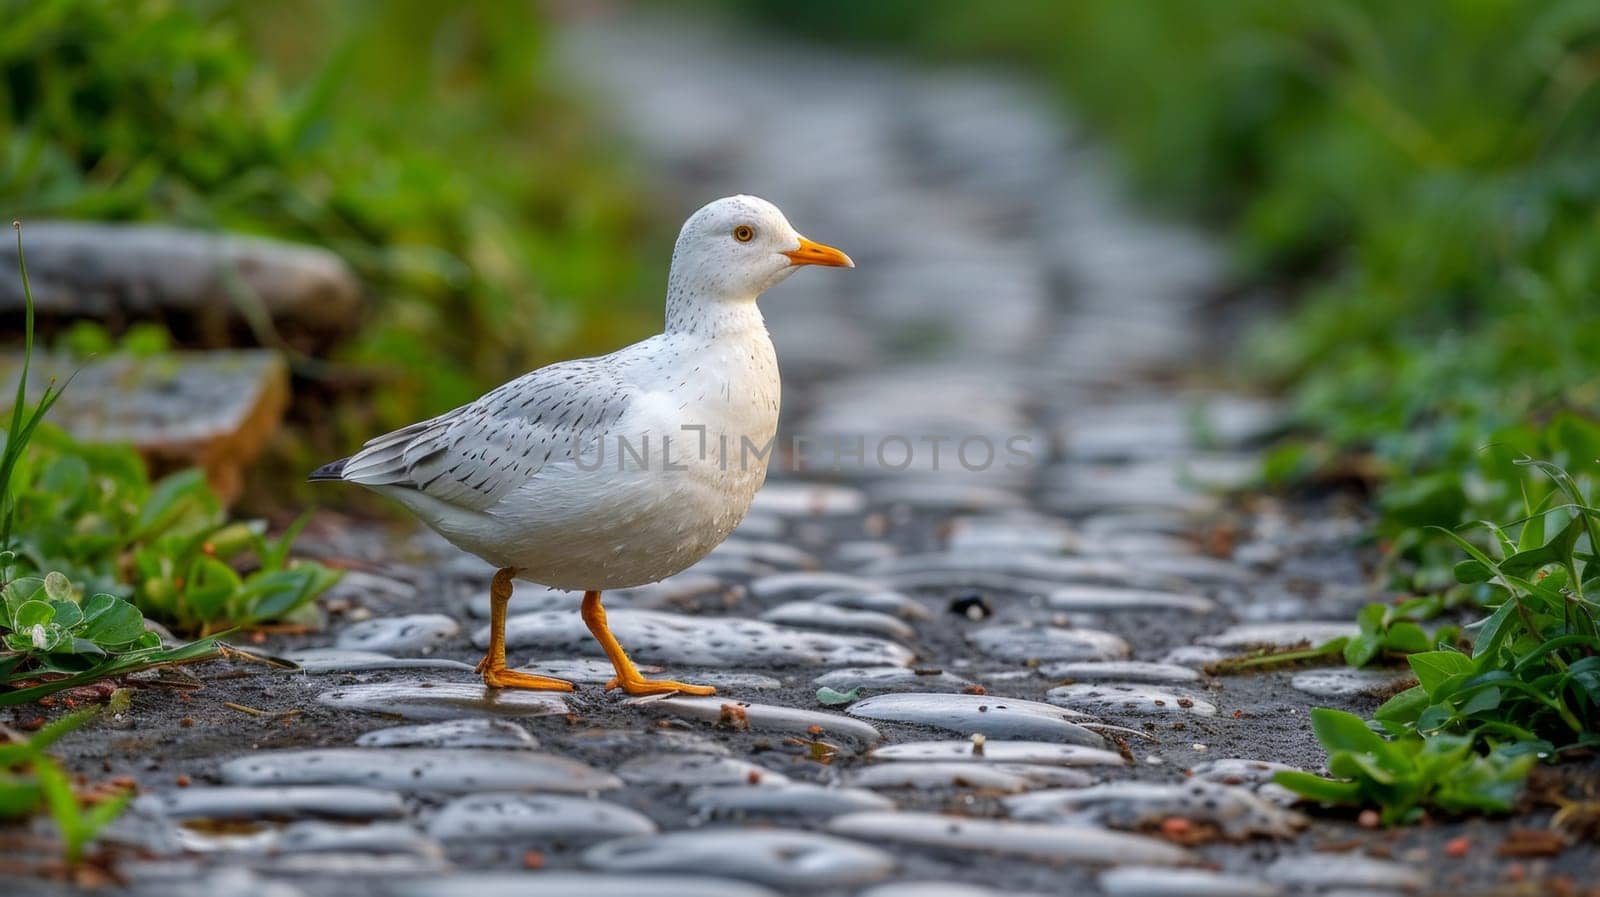 A white bird standing on a stone path with grass and rocks, AI by starush